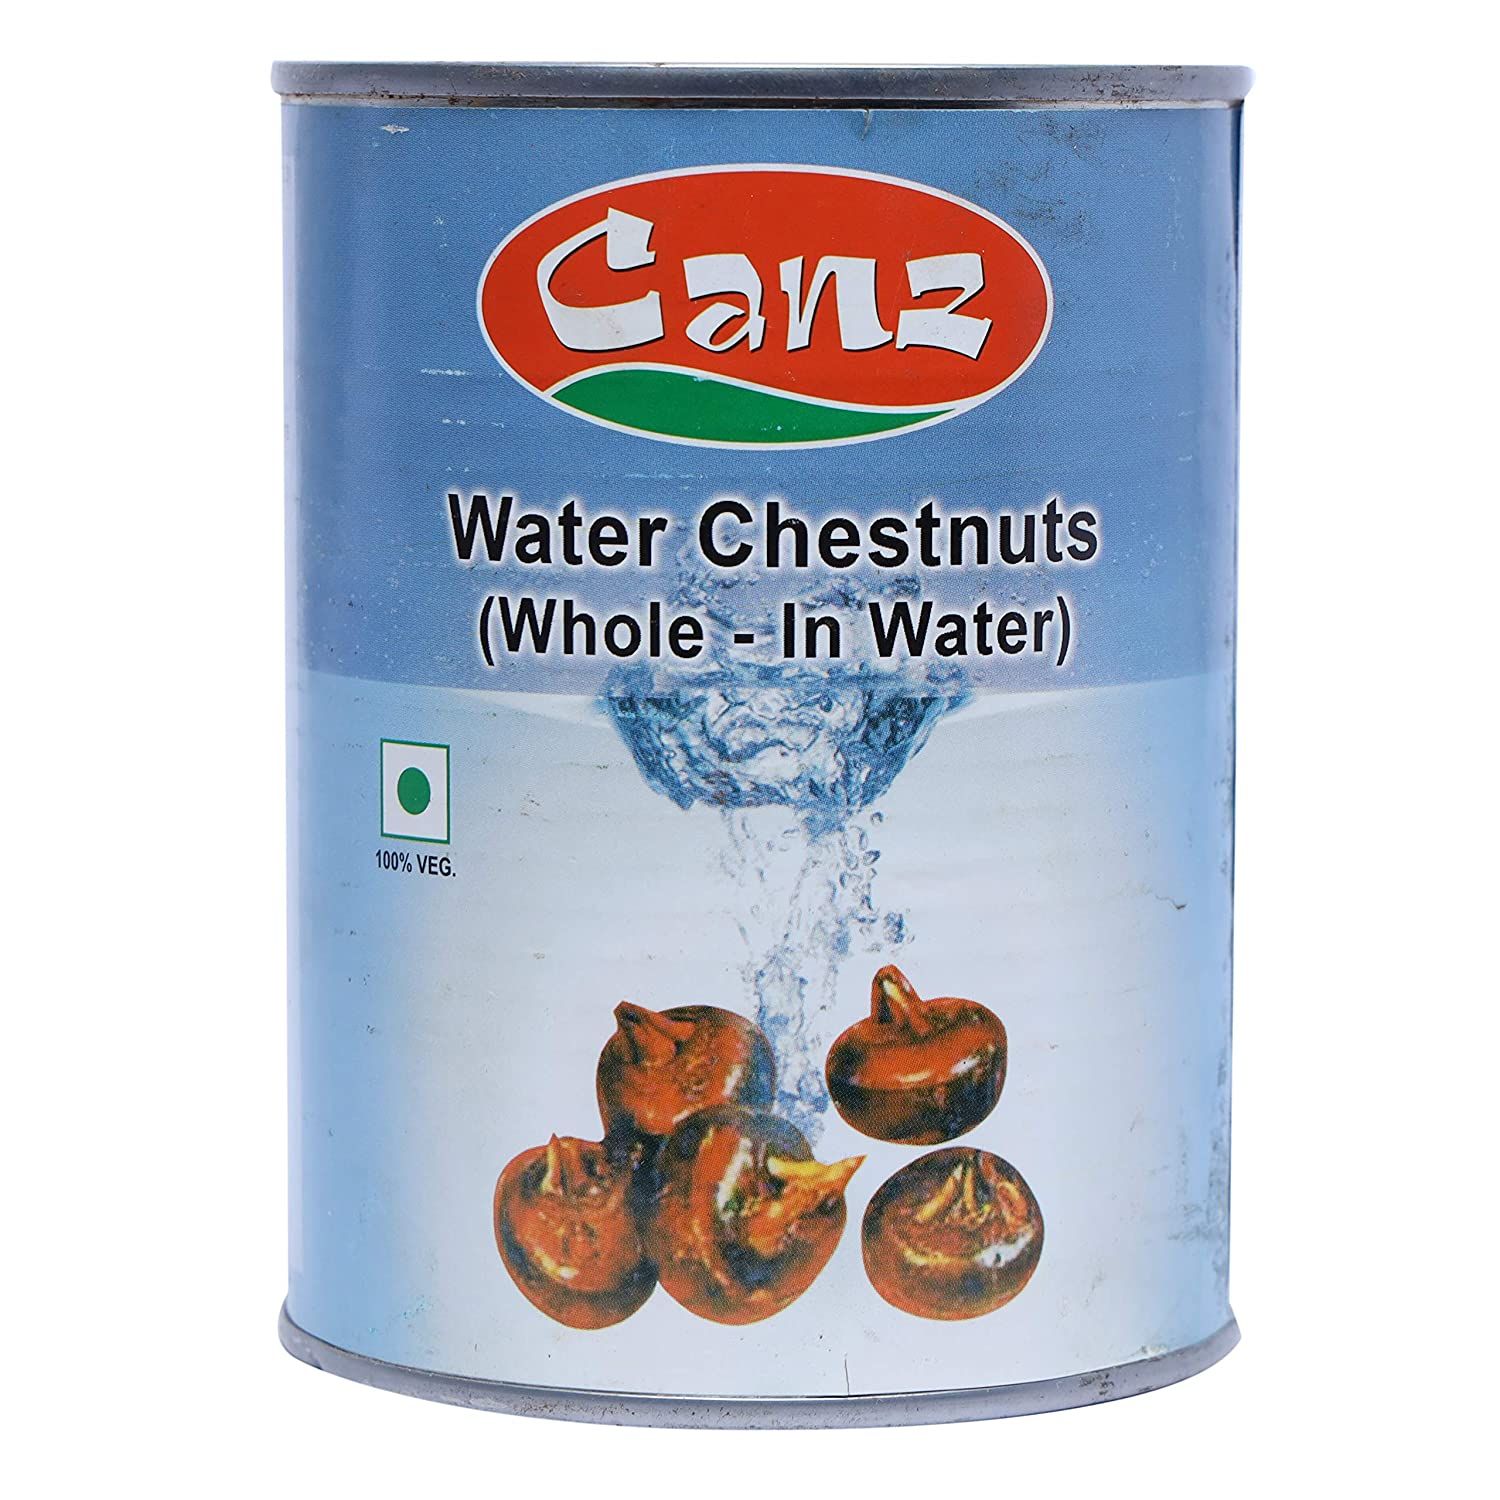 Canz Water Chestnuts Image